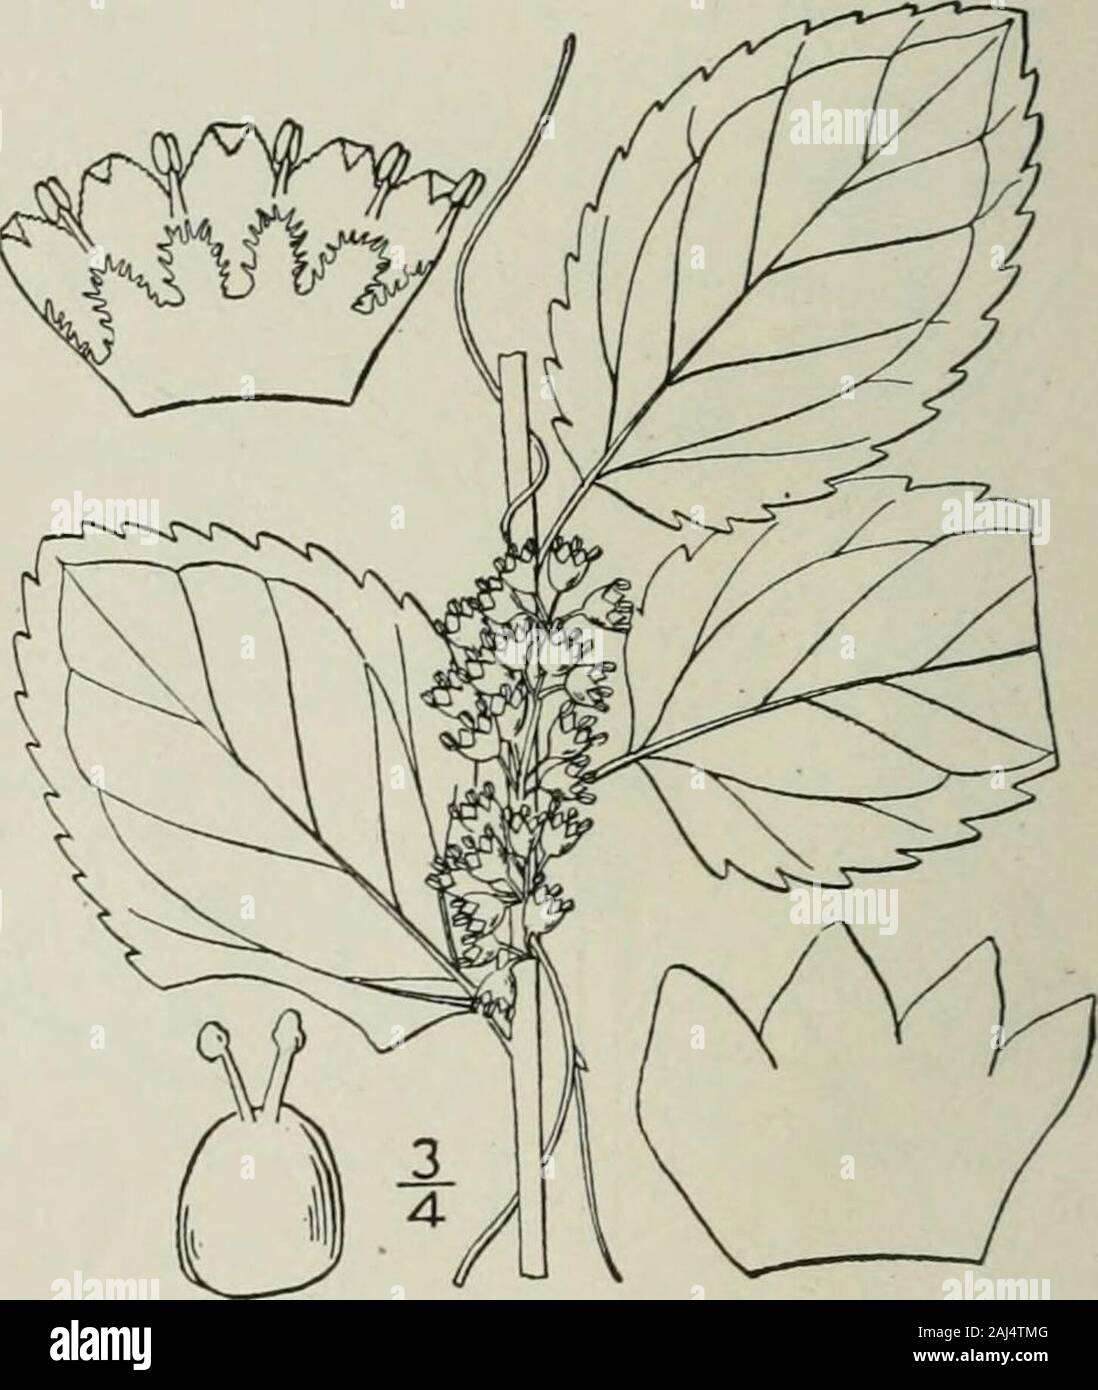 An illustrated flora of the northern United States, Canada and the British possessions : from Newfoundland to the parallel of the southern boundary of Virginia and from the Atlantic Ocean westward to the 102nd meridian . 7. Cuscuta Cephalanthi Engelm. Button-bush Dodder. Fig. 3448. Cuscuta Cephalanthi Engelm. Am. Journ. Sci. 43: 336.pi. 6. f. 1-6. 1842. Cuscuta tenuiflora Engelm.; A, Gray, Man. 350. 1848. Plant yellow, stems rather coarse; flowers abouti long, short-pedicelled, clustered; calyx 5-lobed,the lobes ovate, obtuse, shorter than the corolla-tube;corolla cylindric-campanulate, its lo Stock Photo